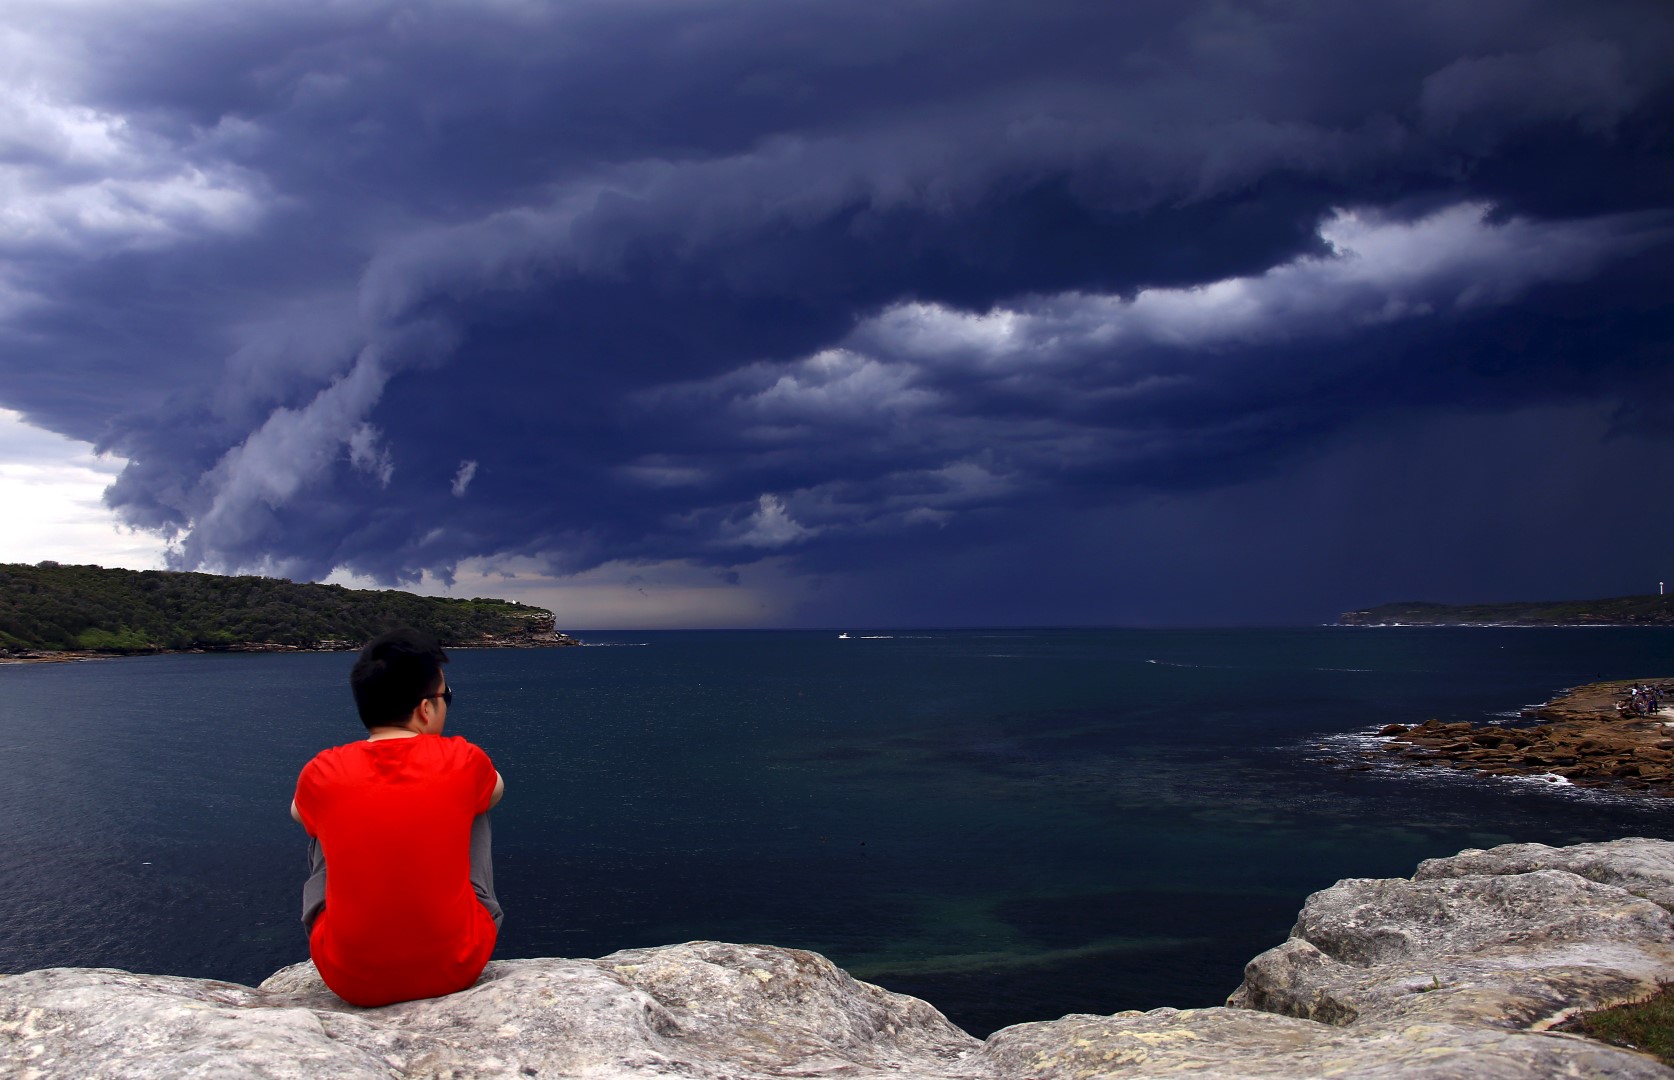 A Chinese tourist watches storm clouds moving along the coast towards the city of Sydney, Australia, November 6, 2015. Powerful storms swept across the city on Friday, with the Australian Bureau of Meteorology issuing a warning for severe thunderstorms with large hailstones, heavy rainfall and damaging winds, local media reported. REUTERS/David Gray - GF20000047792